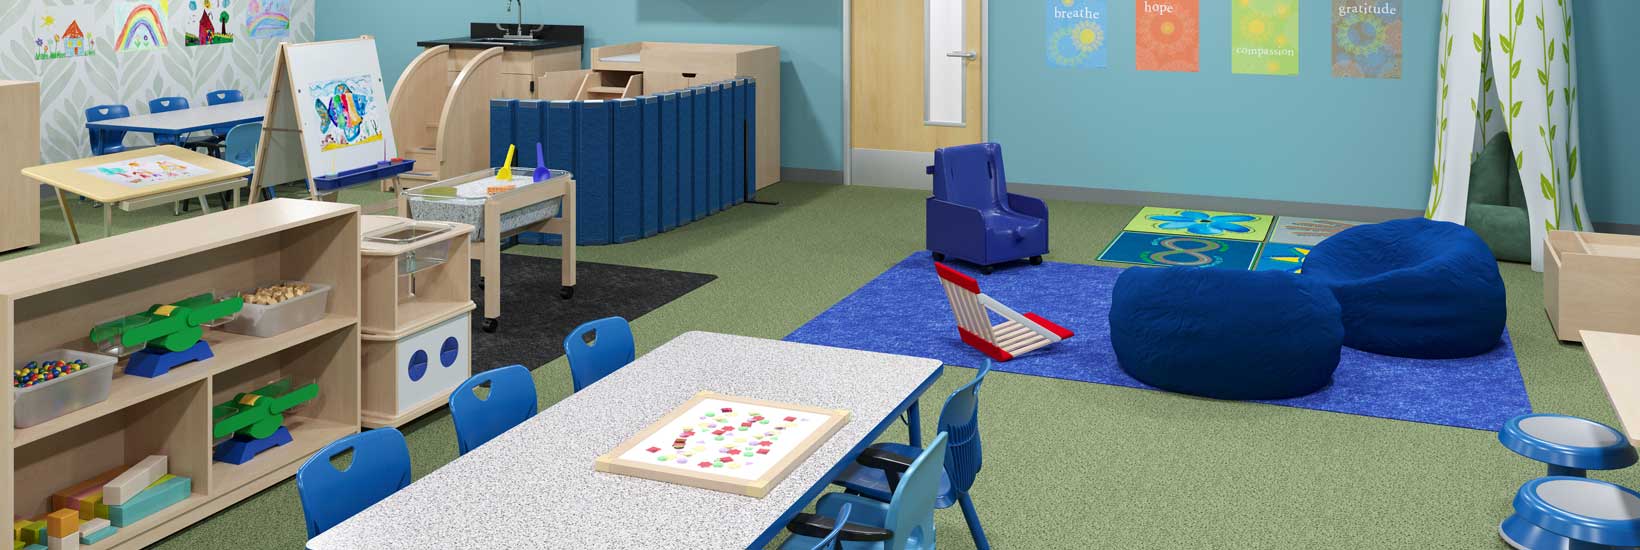 Early Childhood Inclusion Space View 1